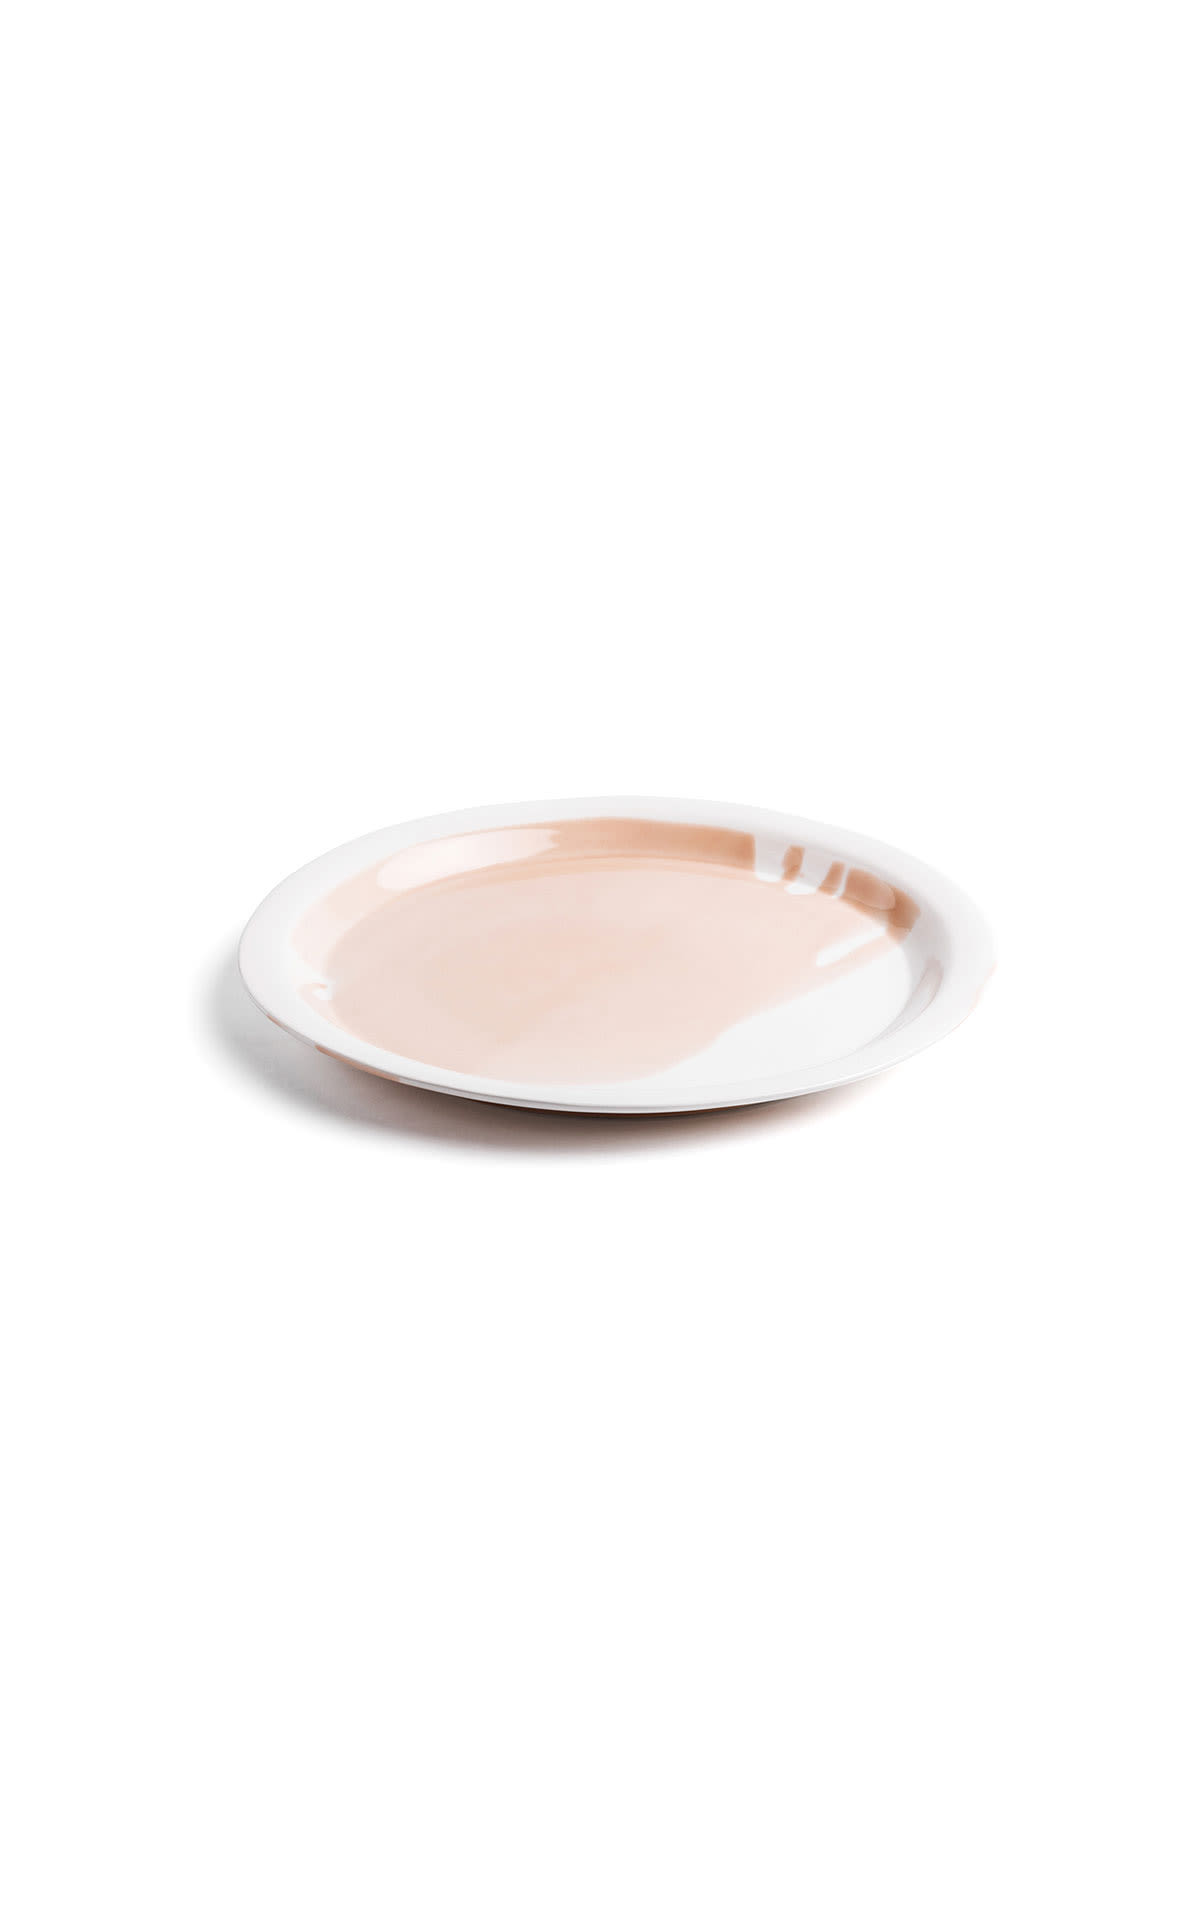 Bamford SF band salad plate blush from Bicester Village